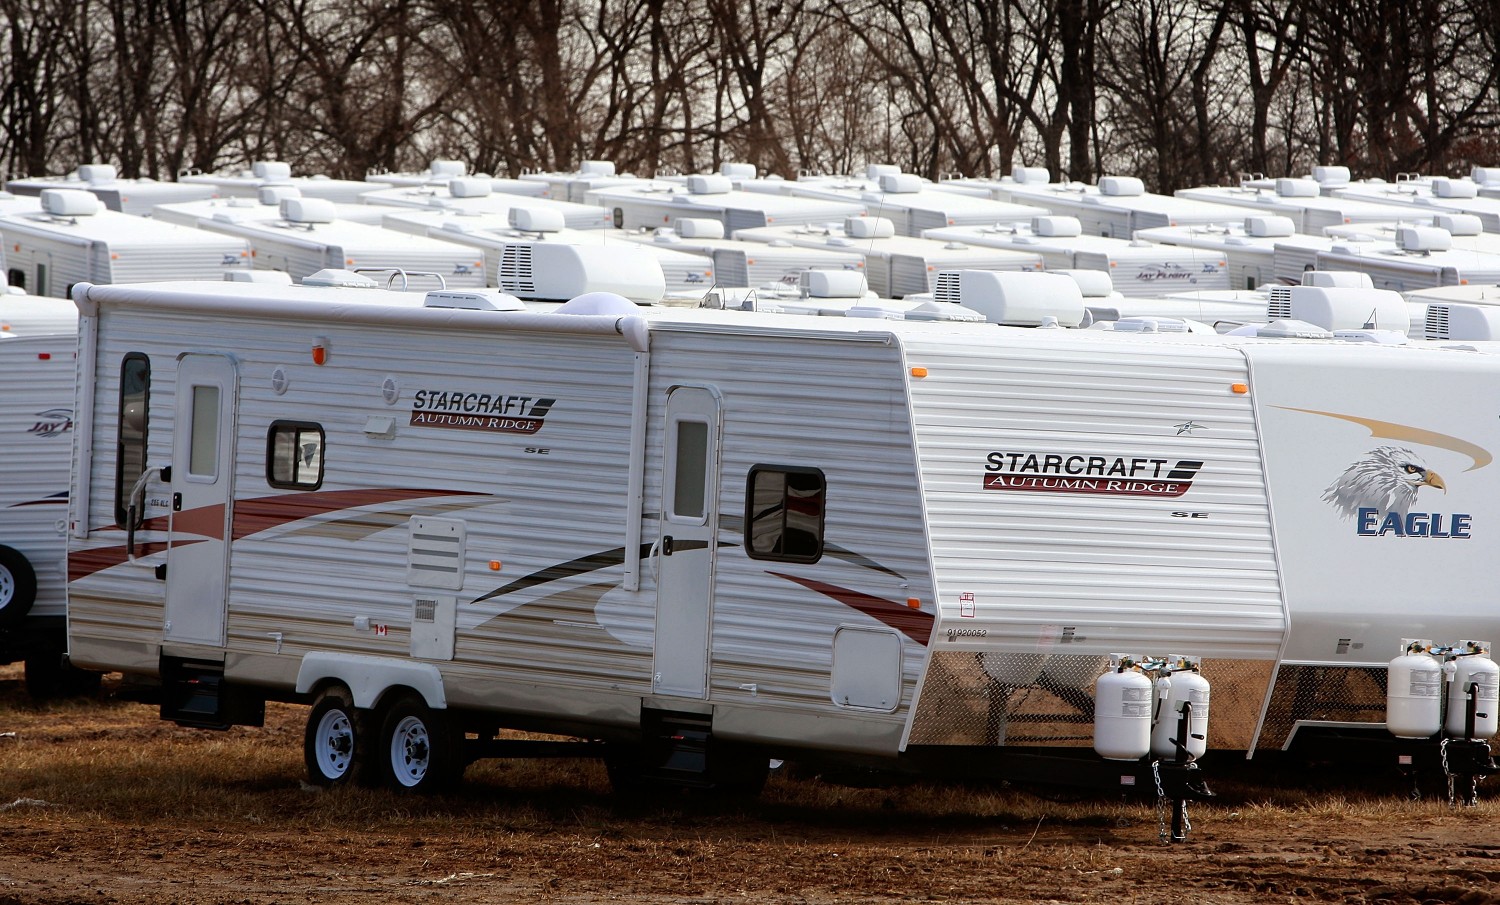 Recreational Vehicle Industry In Indiana Struggling